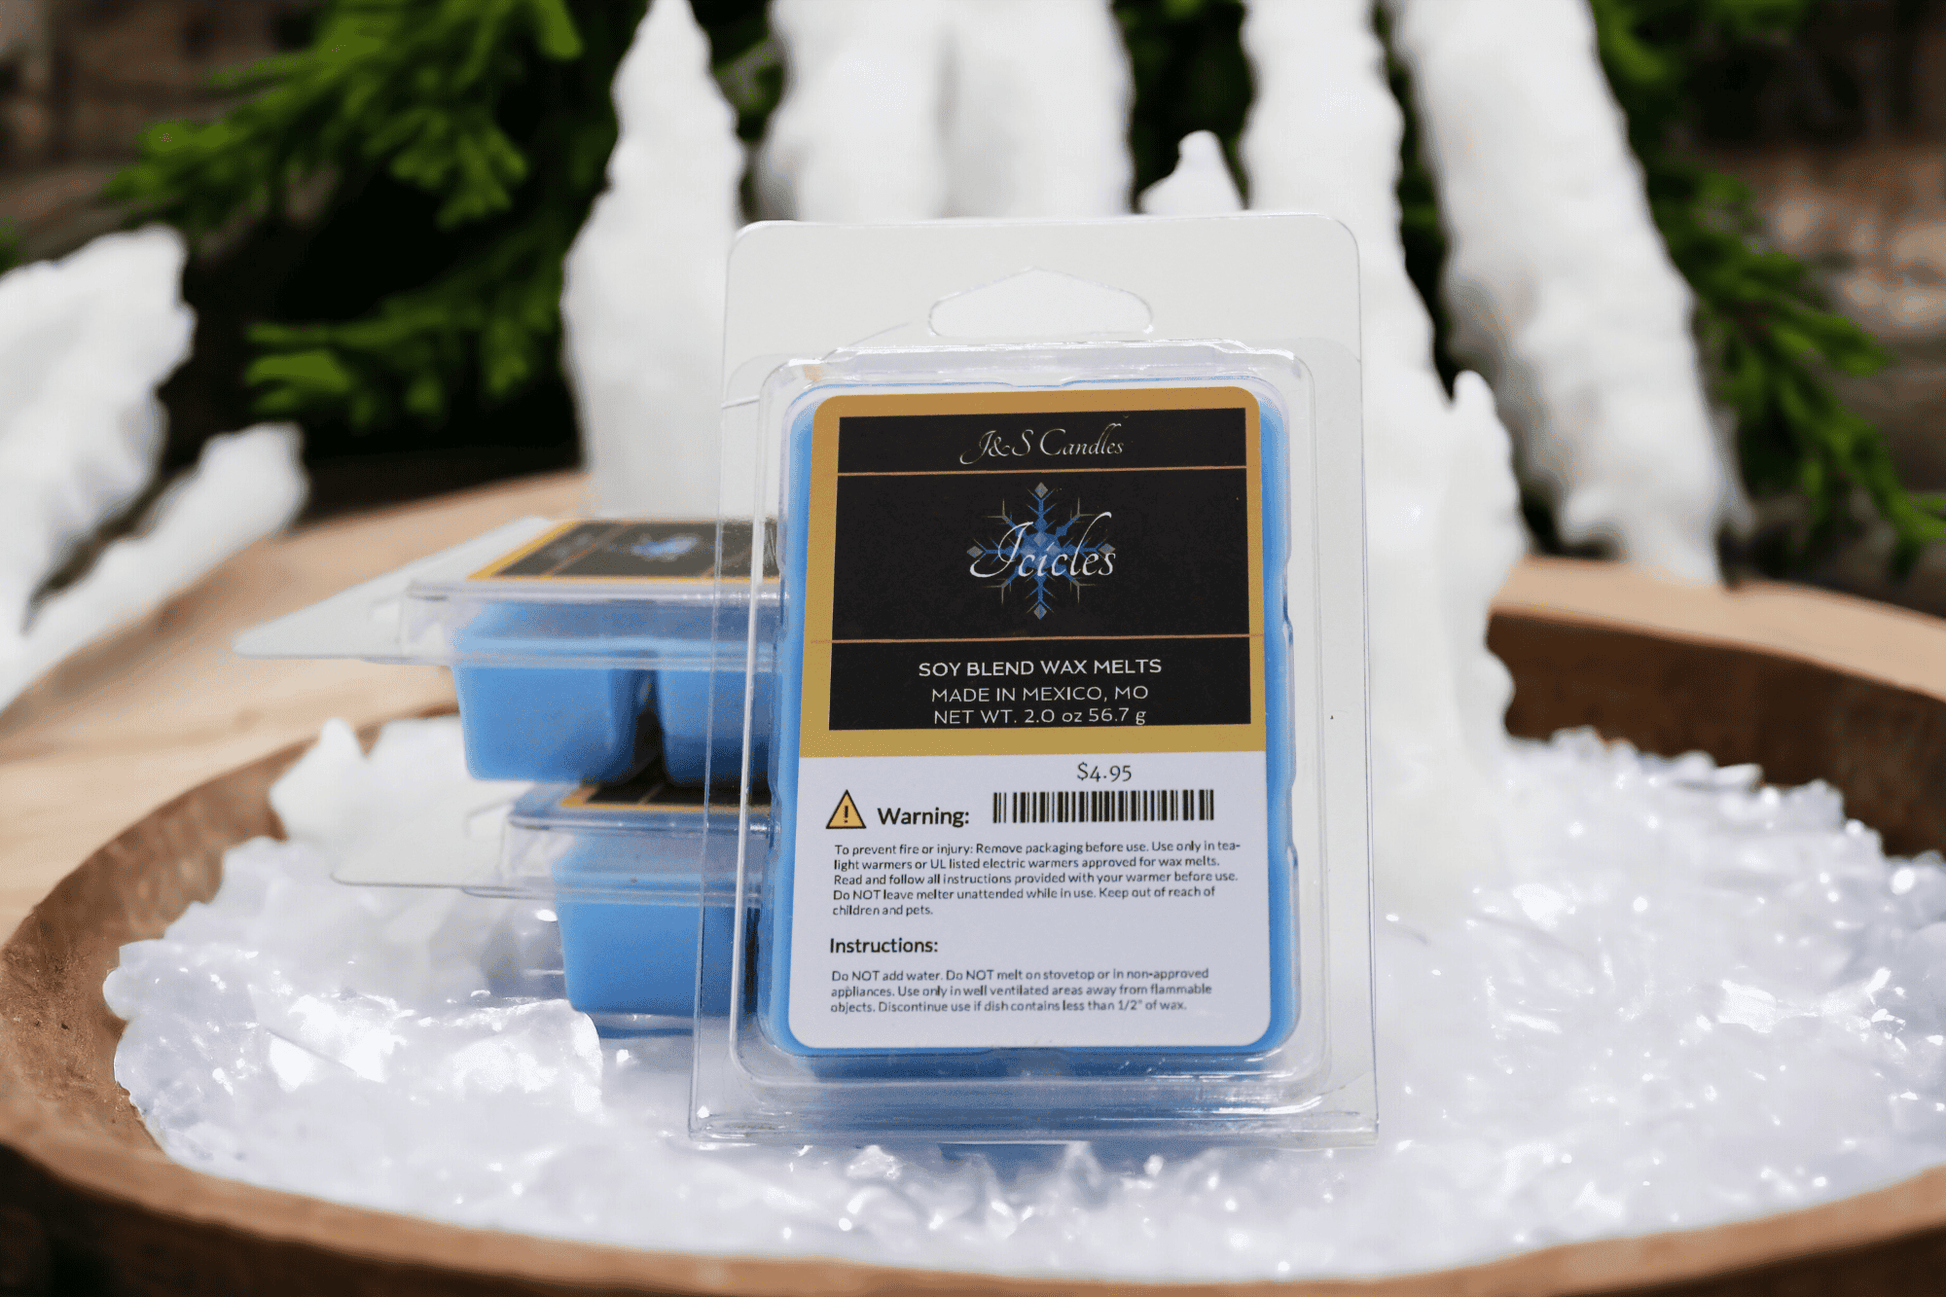 Icicles Wax Melt - J&S Candles